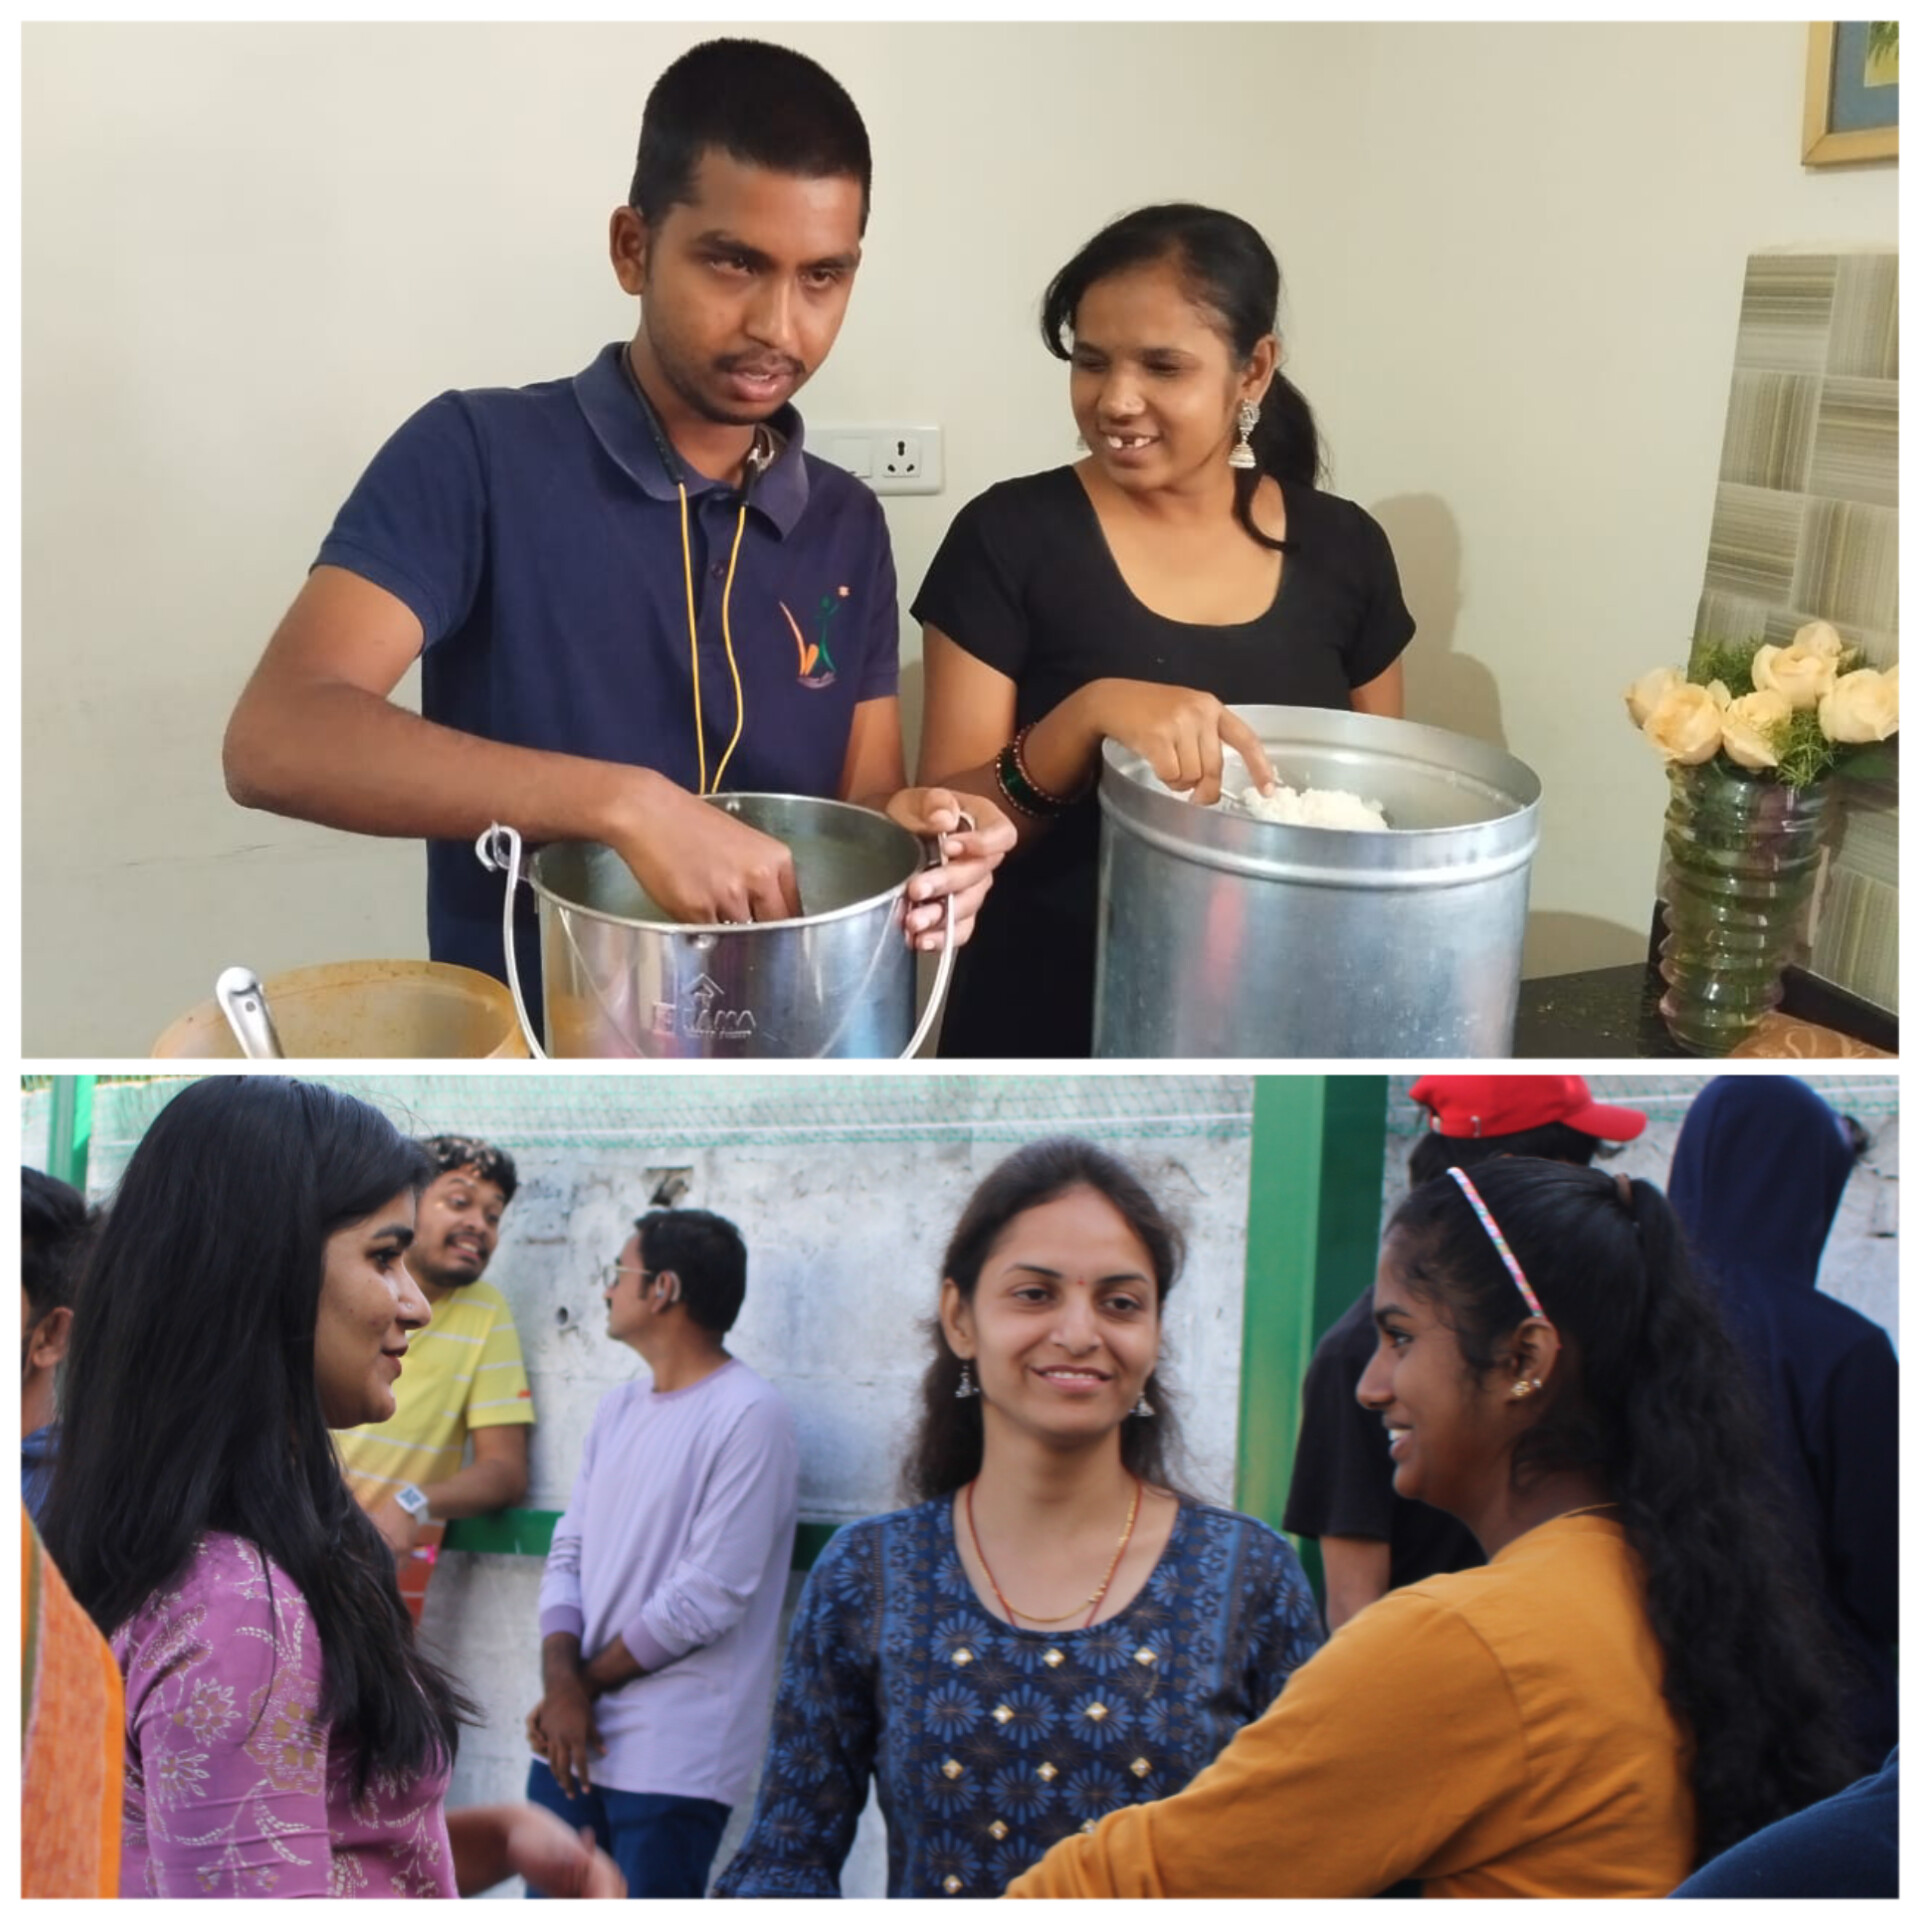 A collage of employees with visual impairment serving food and deaf people interacting with hearing people.